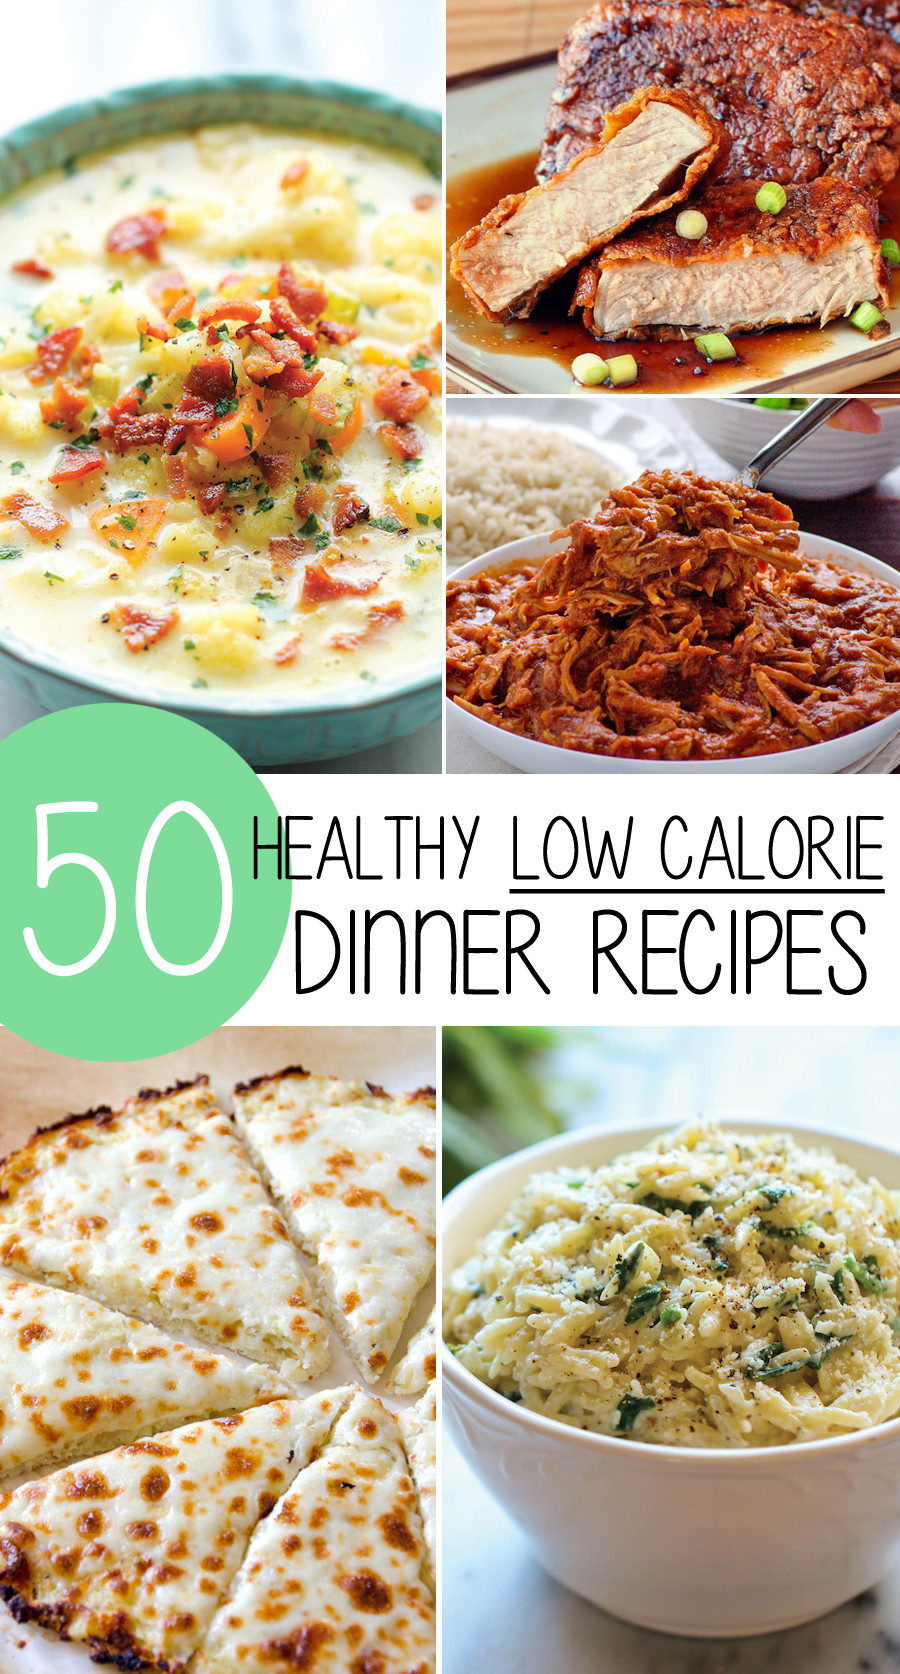 Healthy Weight Loss Recipes
 50 Healthy Low Calorie Weight Loss Dinner Recipes